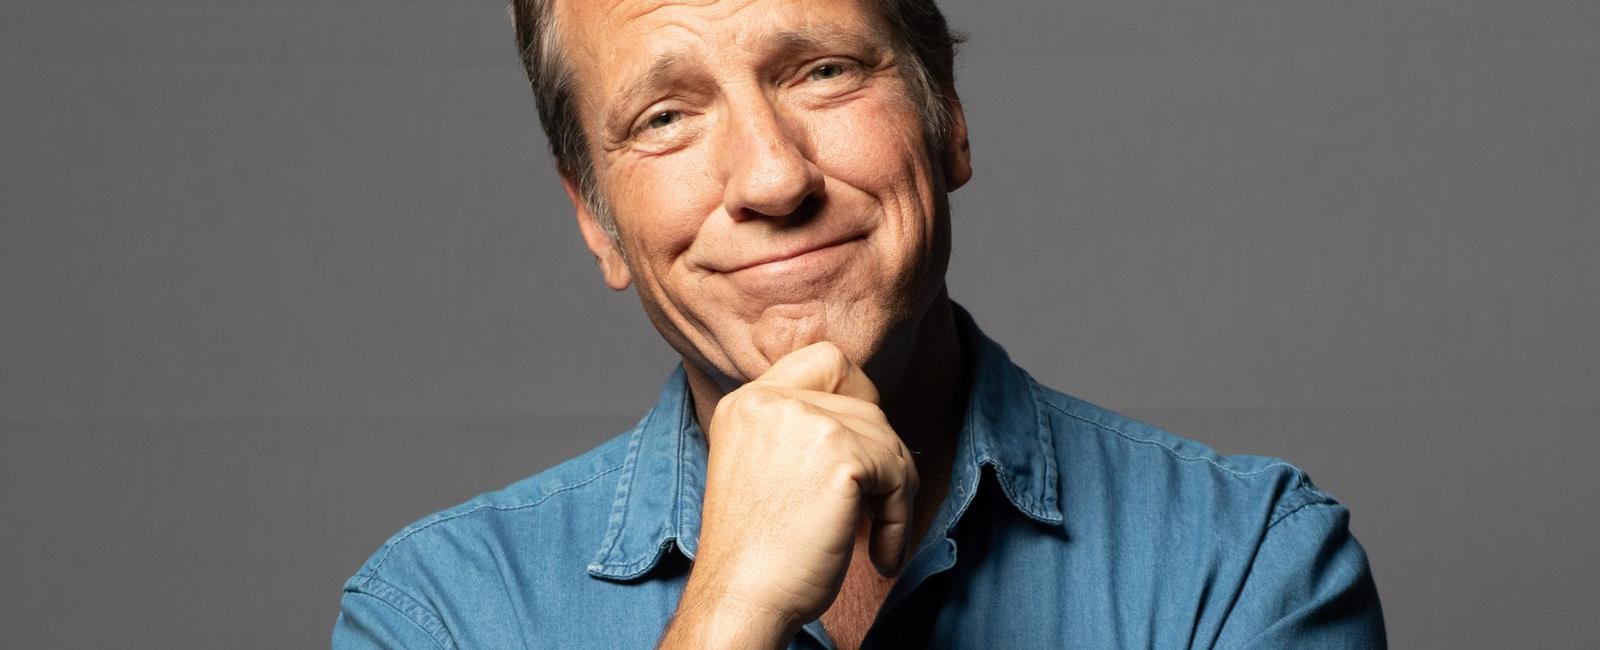 Microsoft threatened 17 year old mike rowe with a lawsuit after the young man launched a website named mikerowesoft com